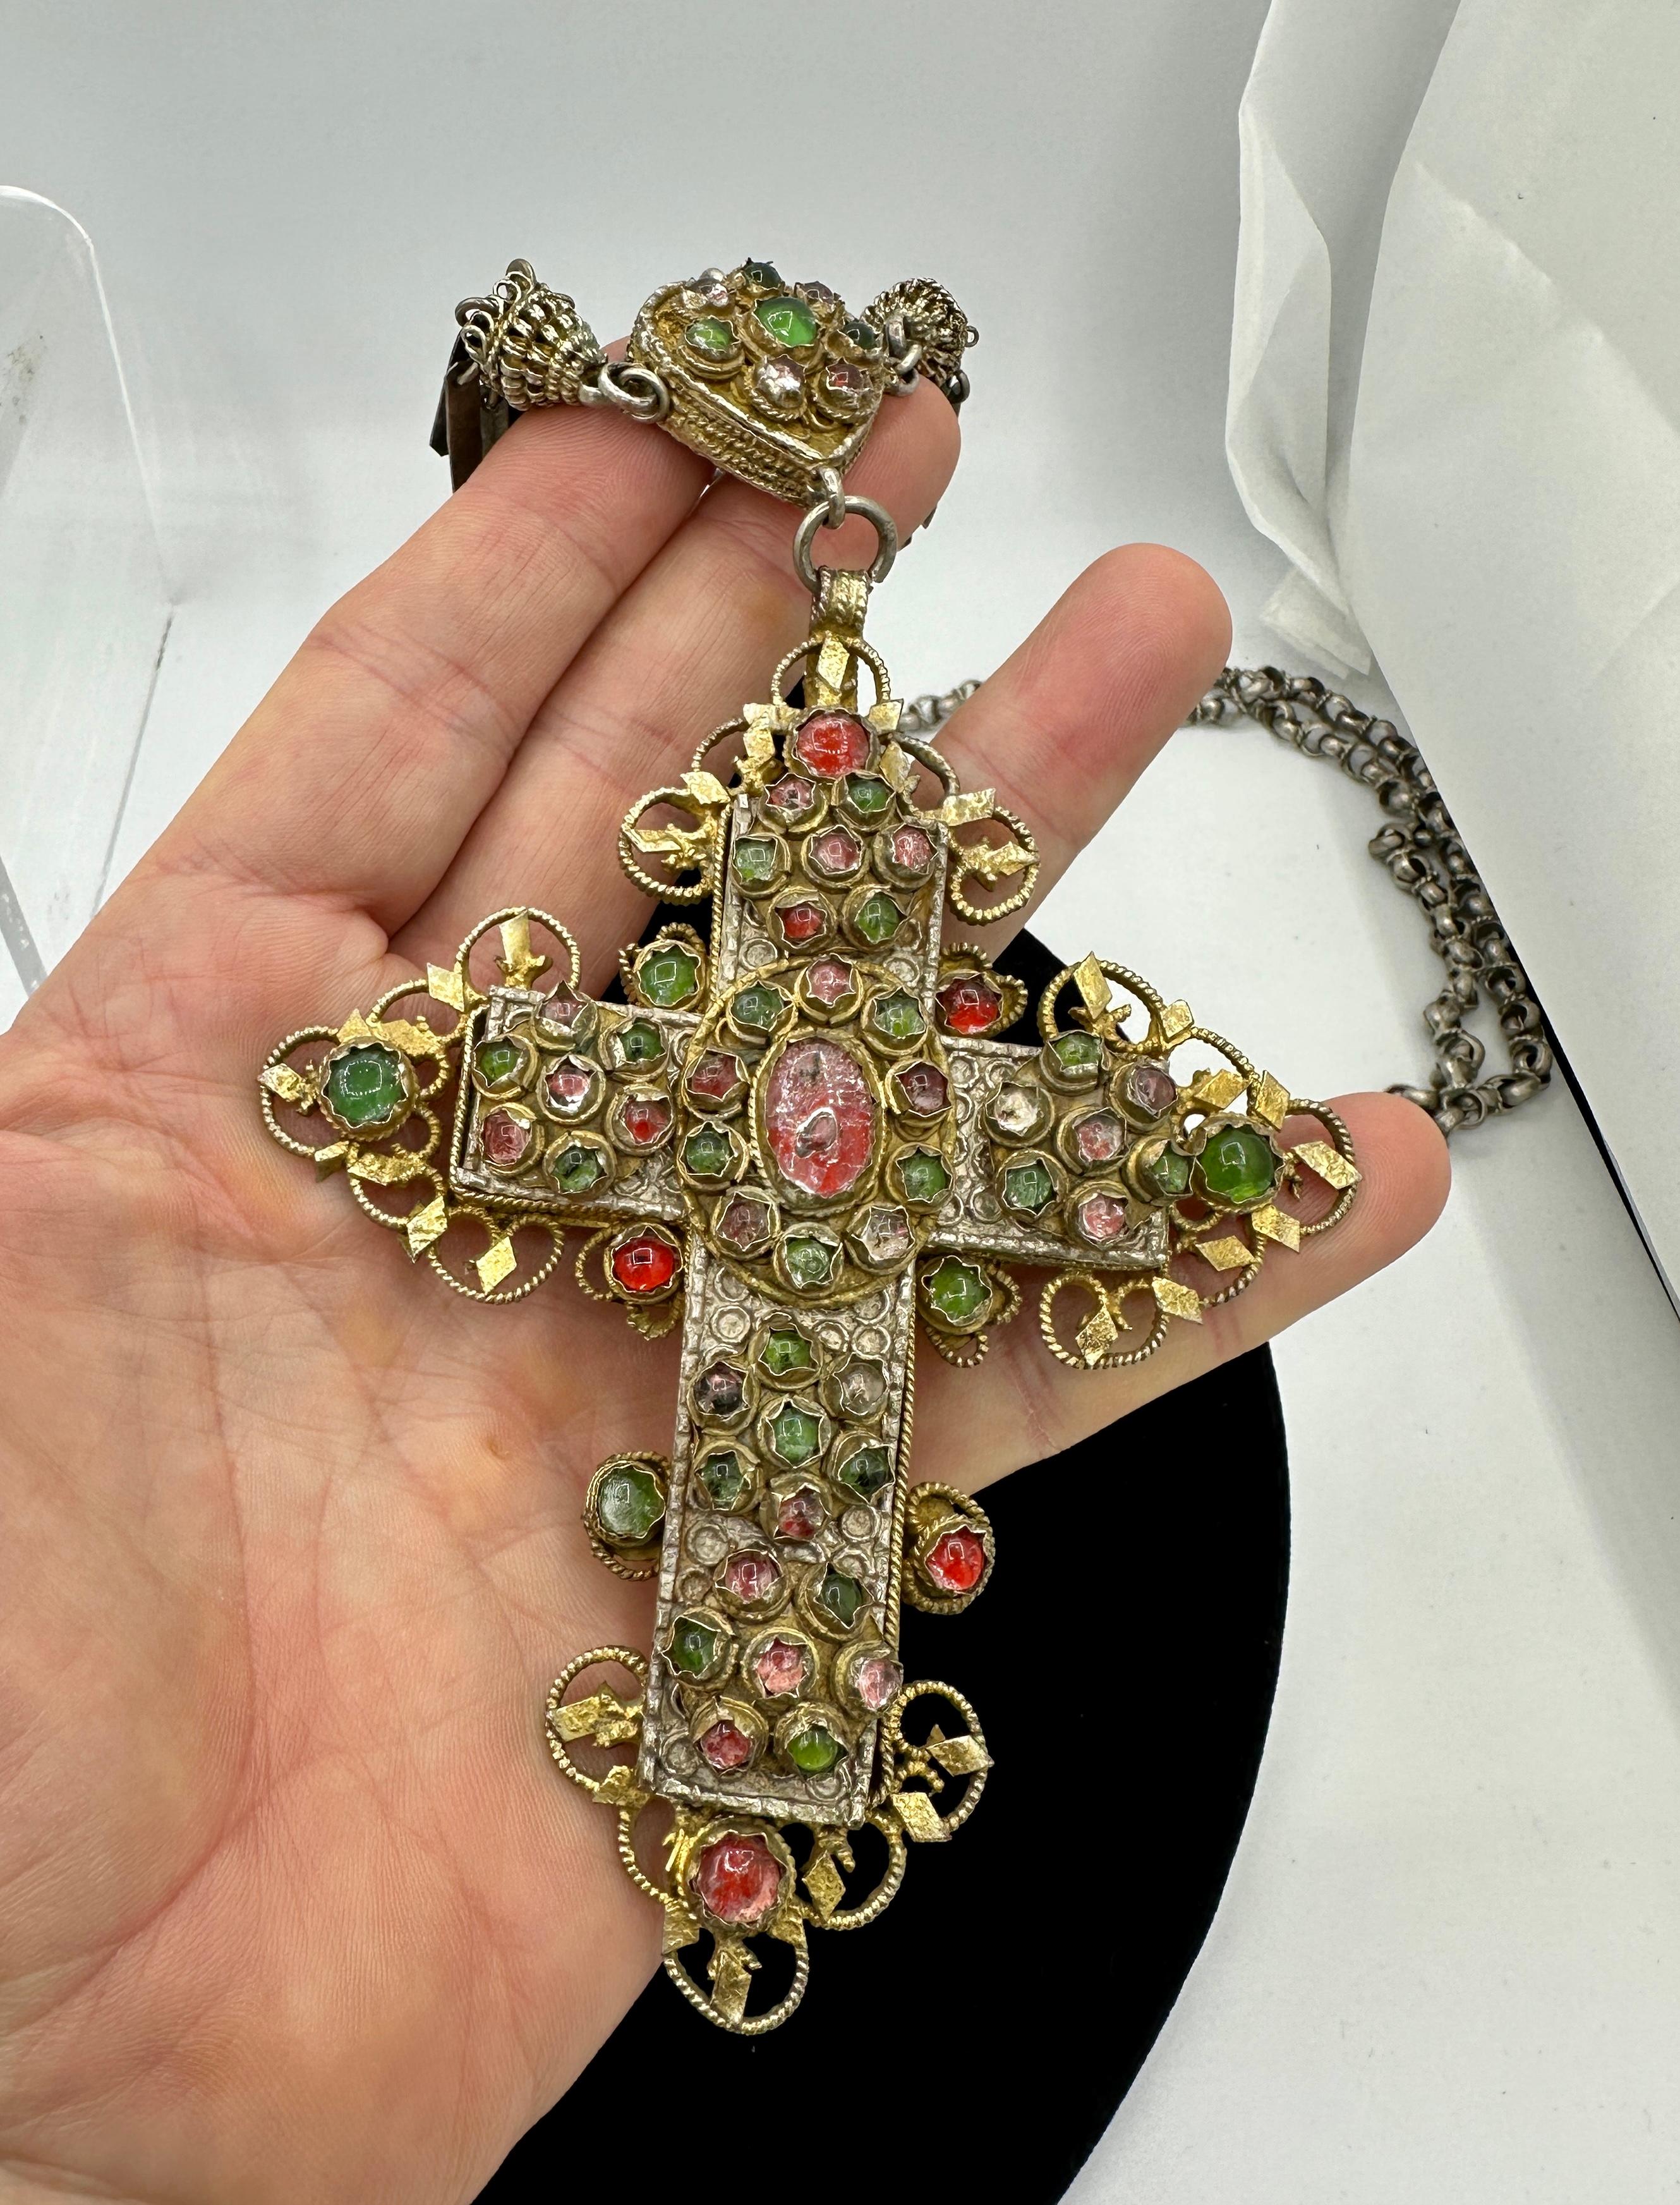 Renaissance Revival Monumental Jeweled 7 Inch Bishop Cross And Heart Necklace 46 Inch Silver Chain For Sale